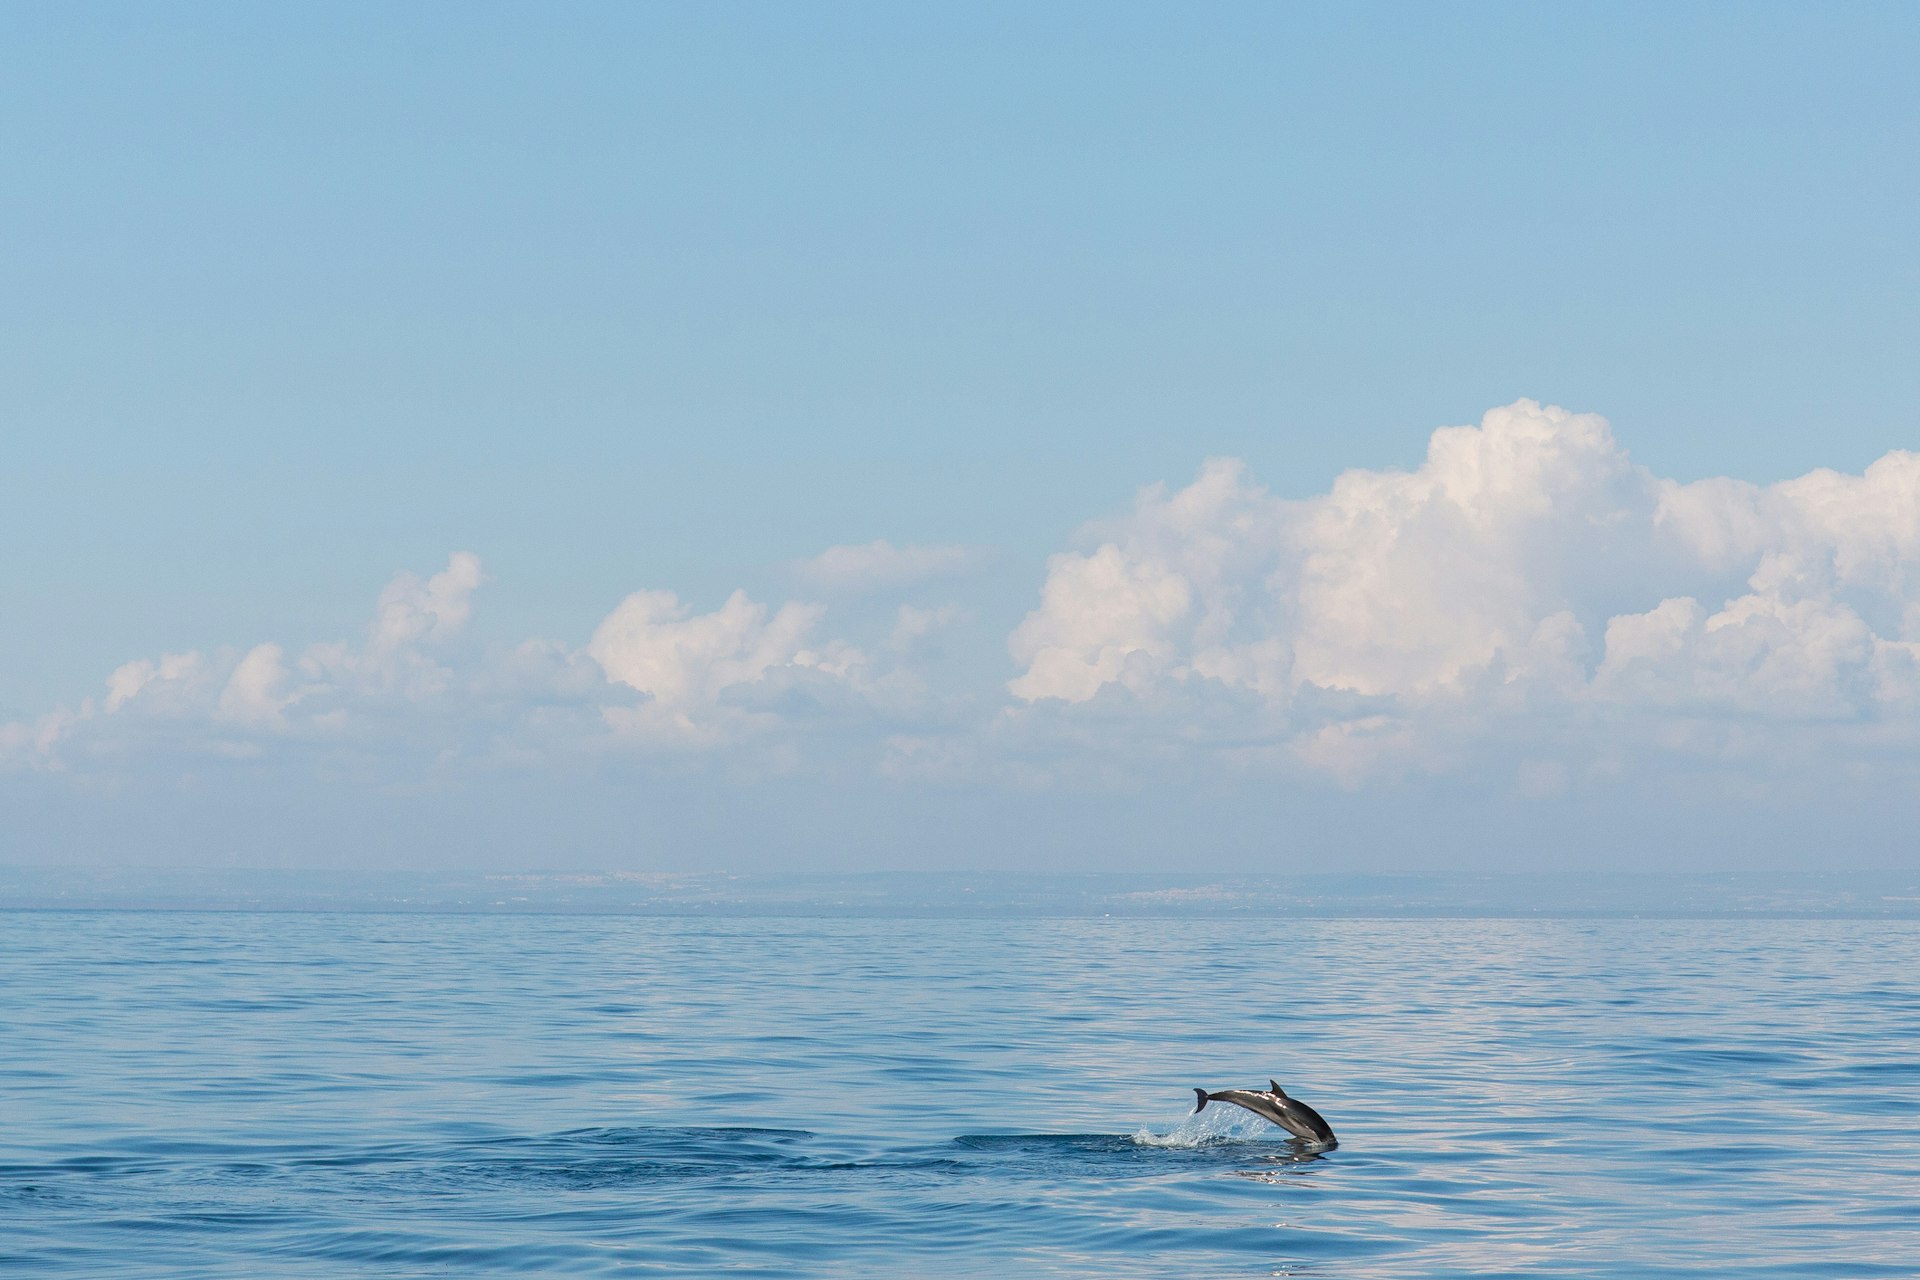 A single dolphin gracefully leaps out of a very still ocean with no other creatures and no boats in sight